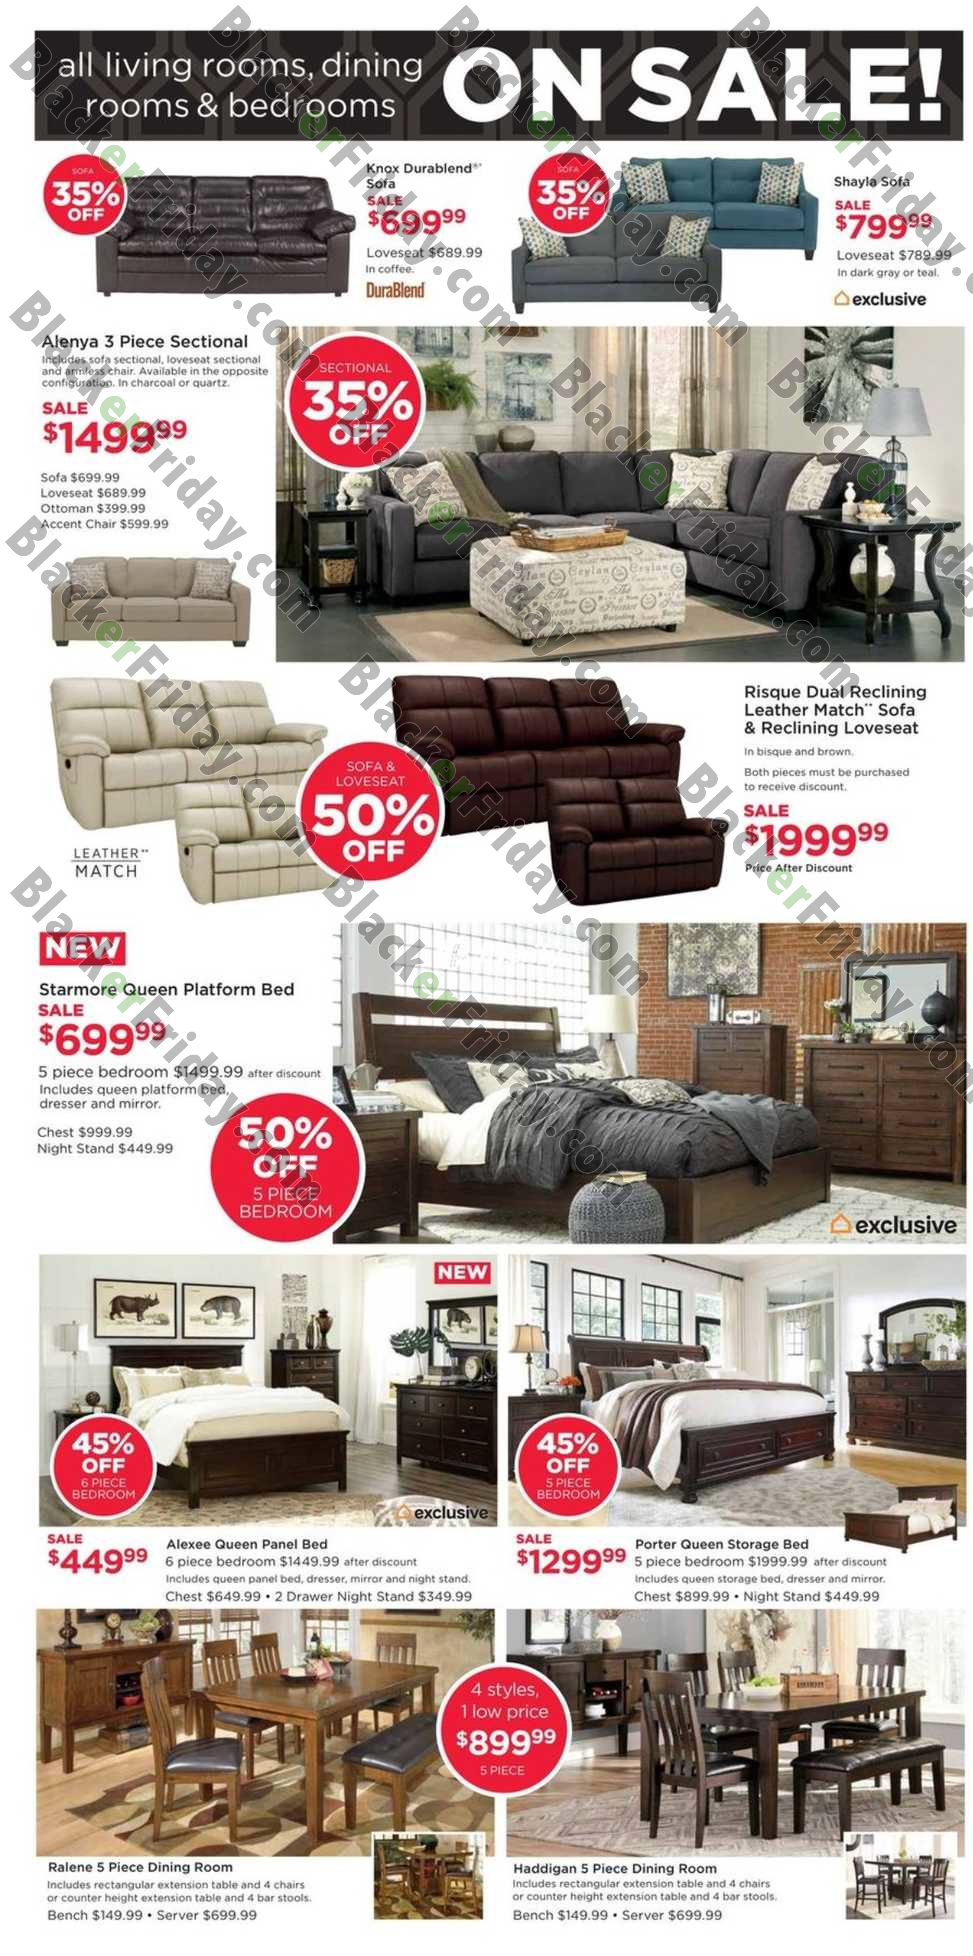 Ashley Furniture Homestore Black Friday 2020 Sale What To Expect